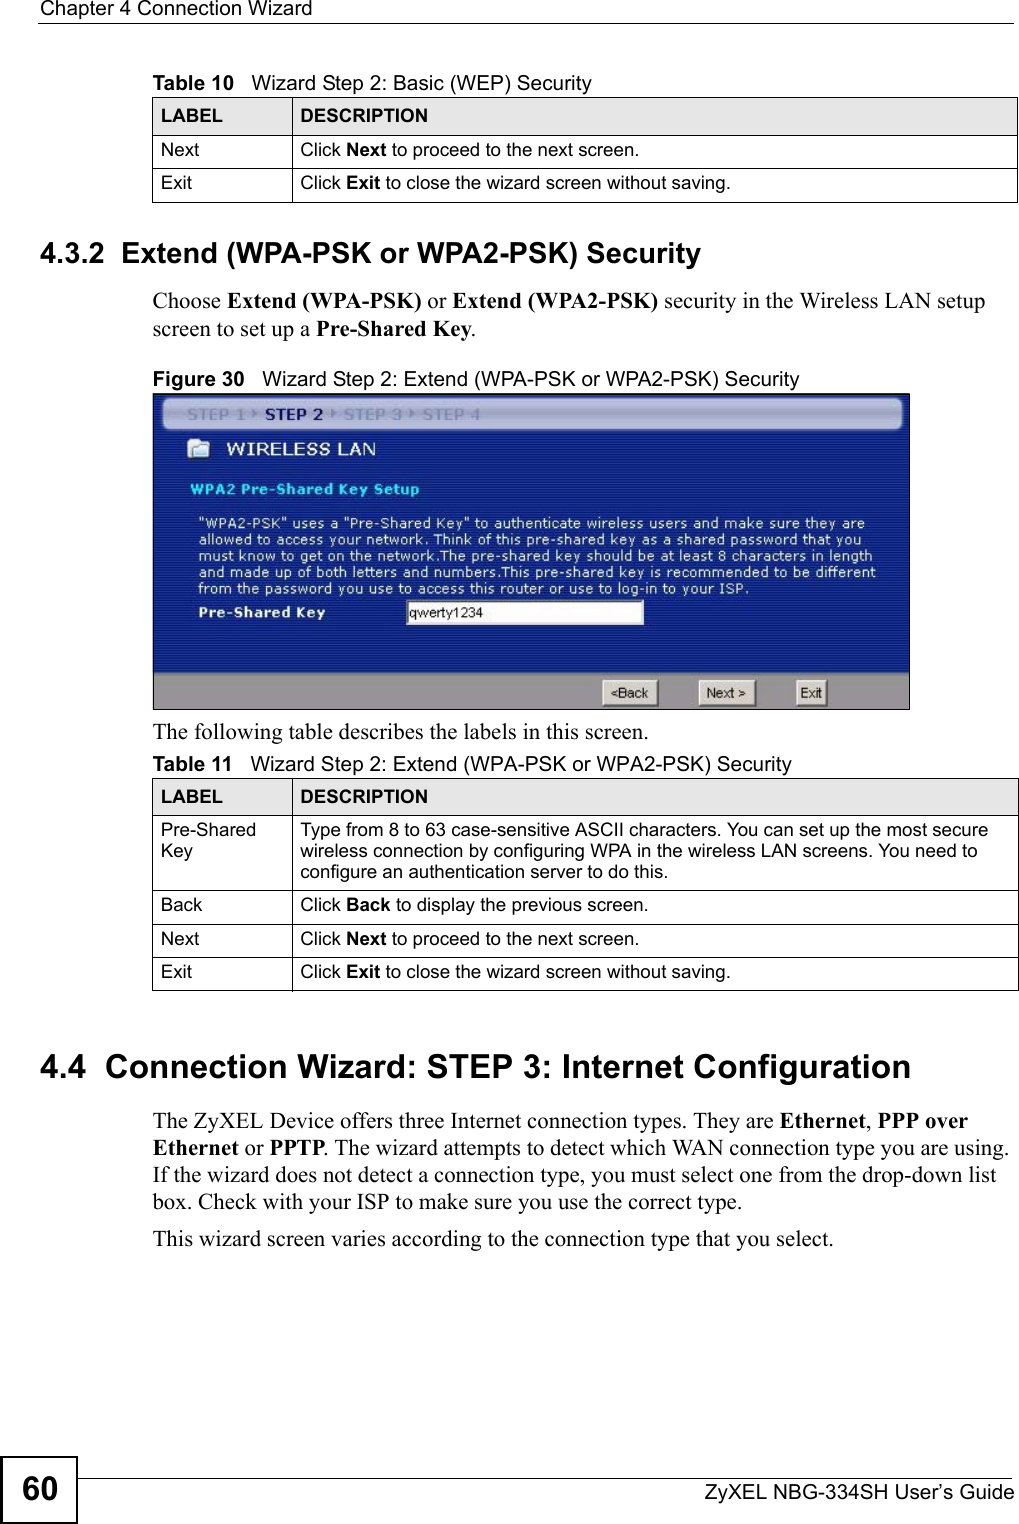 Chapter 4 Connection WizardZyXEL NBG-334SH User’s Guide604.3.2  Extend (WPA-PSK or WPA2-PSK) SecurityChoose Extend (WPA-PSK) or Extend (WPA2-PSK) security in the Wireless LAN setup screen to set up a Pre-Shared Key.Figure 30   Wizard Step 2: Extend (WPA-PSK or WPA2-PSK) SecurityThe following table describes the labels in this screen. 4.4  Connection Wizard: STEP 3: Internet ConfigurationThe ZyXEL Device offers three Internet connection types. They are Ethernet, PPP over Ethernet or PPTP. The wizard attempts to detect which WAN connection type you are using. If the wizard does not detect a connection type, you must select one from the drop-down list box. Check with your ISP to make sure you use the correct type.This wizard screen varies according to the connection type that you select.Next Click Next to proceed to the next screen. Exit Click Exit to close the wizard screen without saving.Table 10   Wizard Step 2: Basic (WEP) SecurityLABEL DESCRIPTIONTable 11   Wizard Step 2: Extend (WPA-PSK or WPA2-PSK) SecurityLABEL DESCRIPTIONPre-Shared KeyType from 8 to 63 case-sensitive ASCII characters. You can set up the most secure wireless connection by configuring WPA in the wireless LAN screens. You need to configure an authentication server to do this.Back Click Back to display the previous screen.Next Click Next to proceed to the next screen. Exit Click Exit to close the wizard screen without saving.